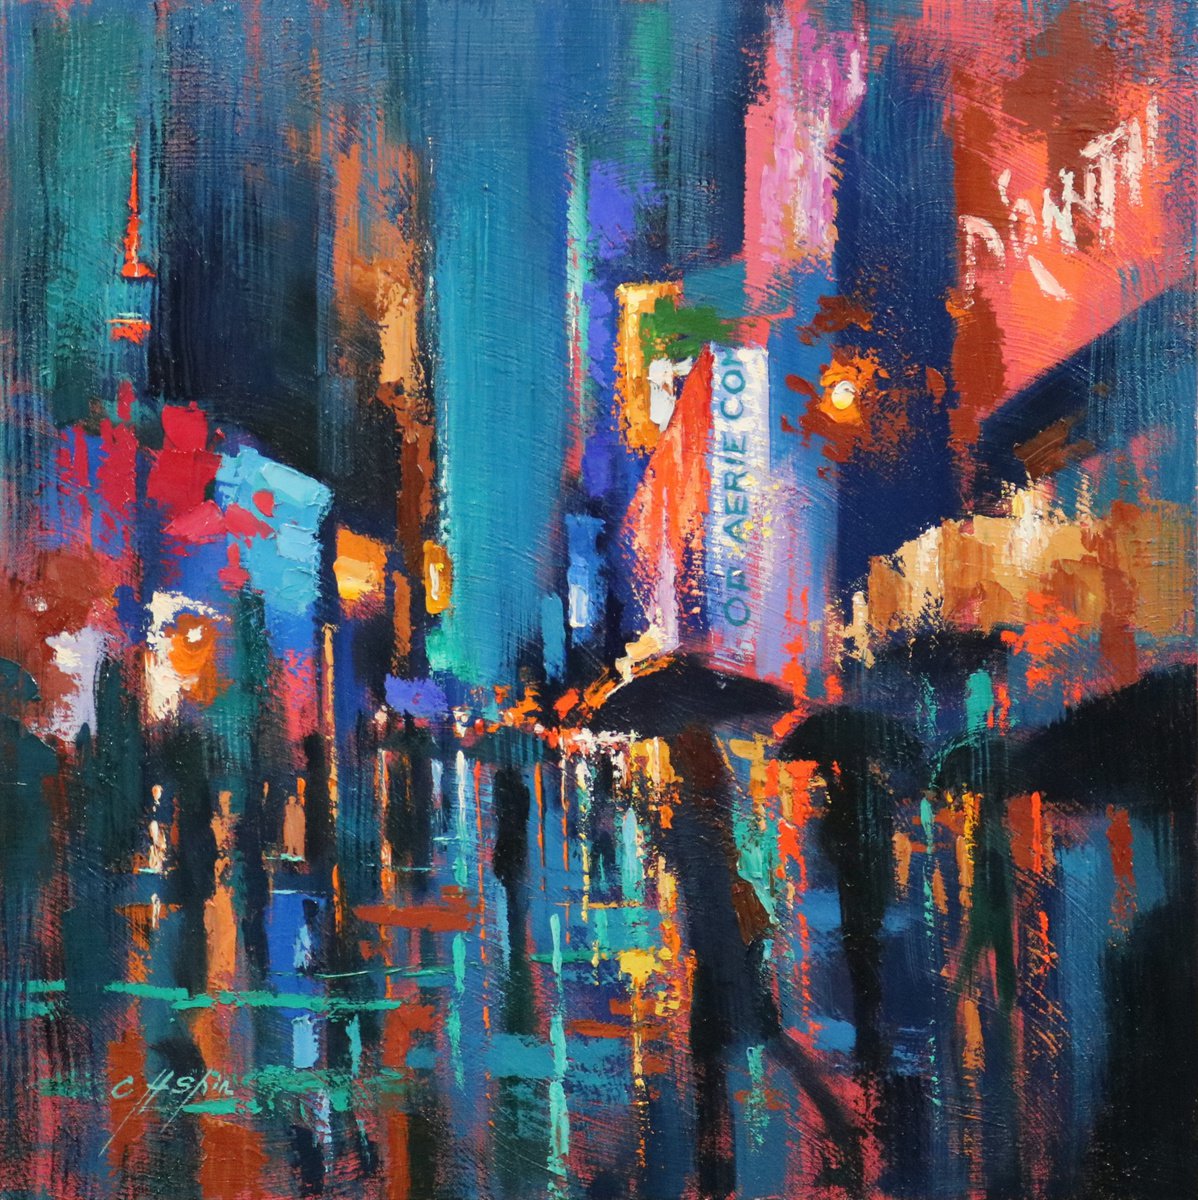 Night Walkers in Time Square by Chin H Shin